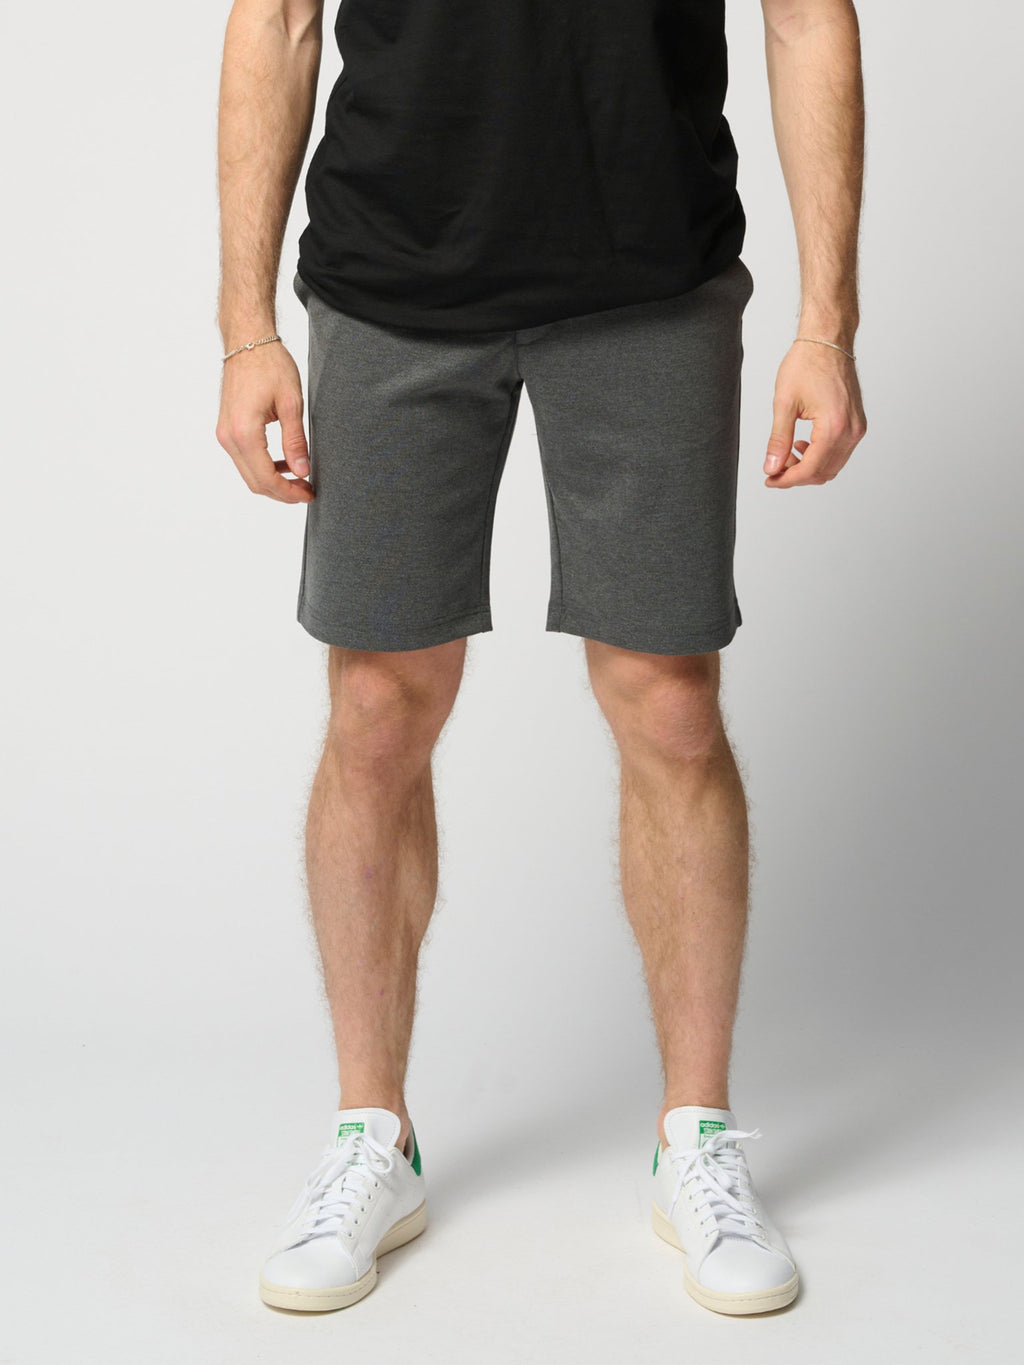 Performance Shorts - Paquete (4 uds.)